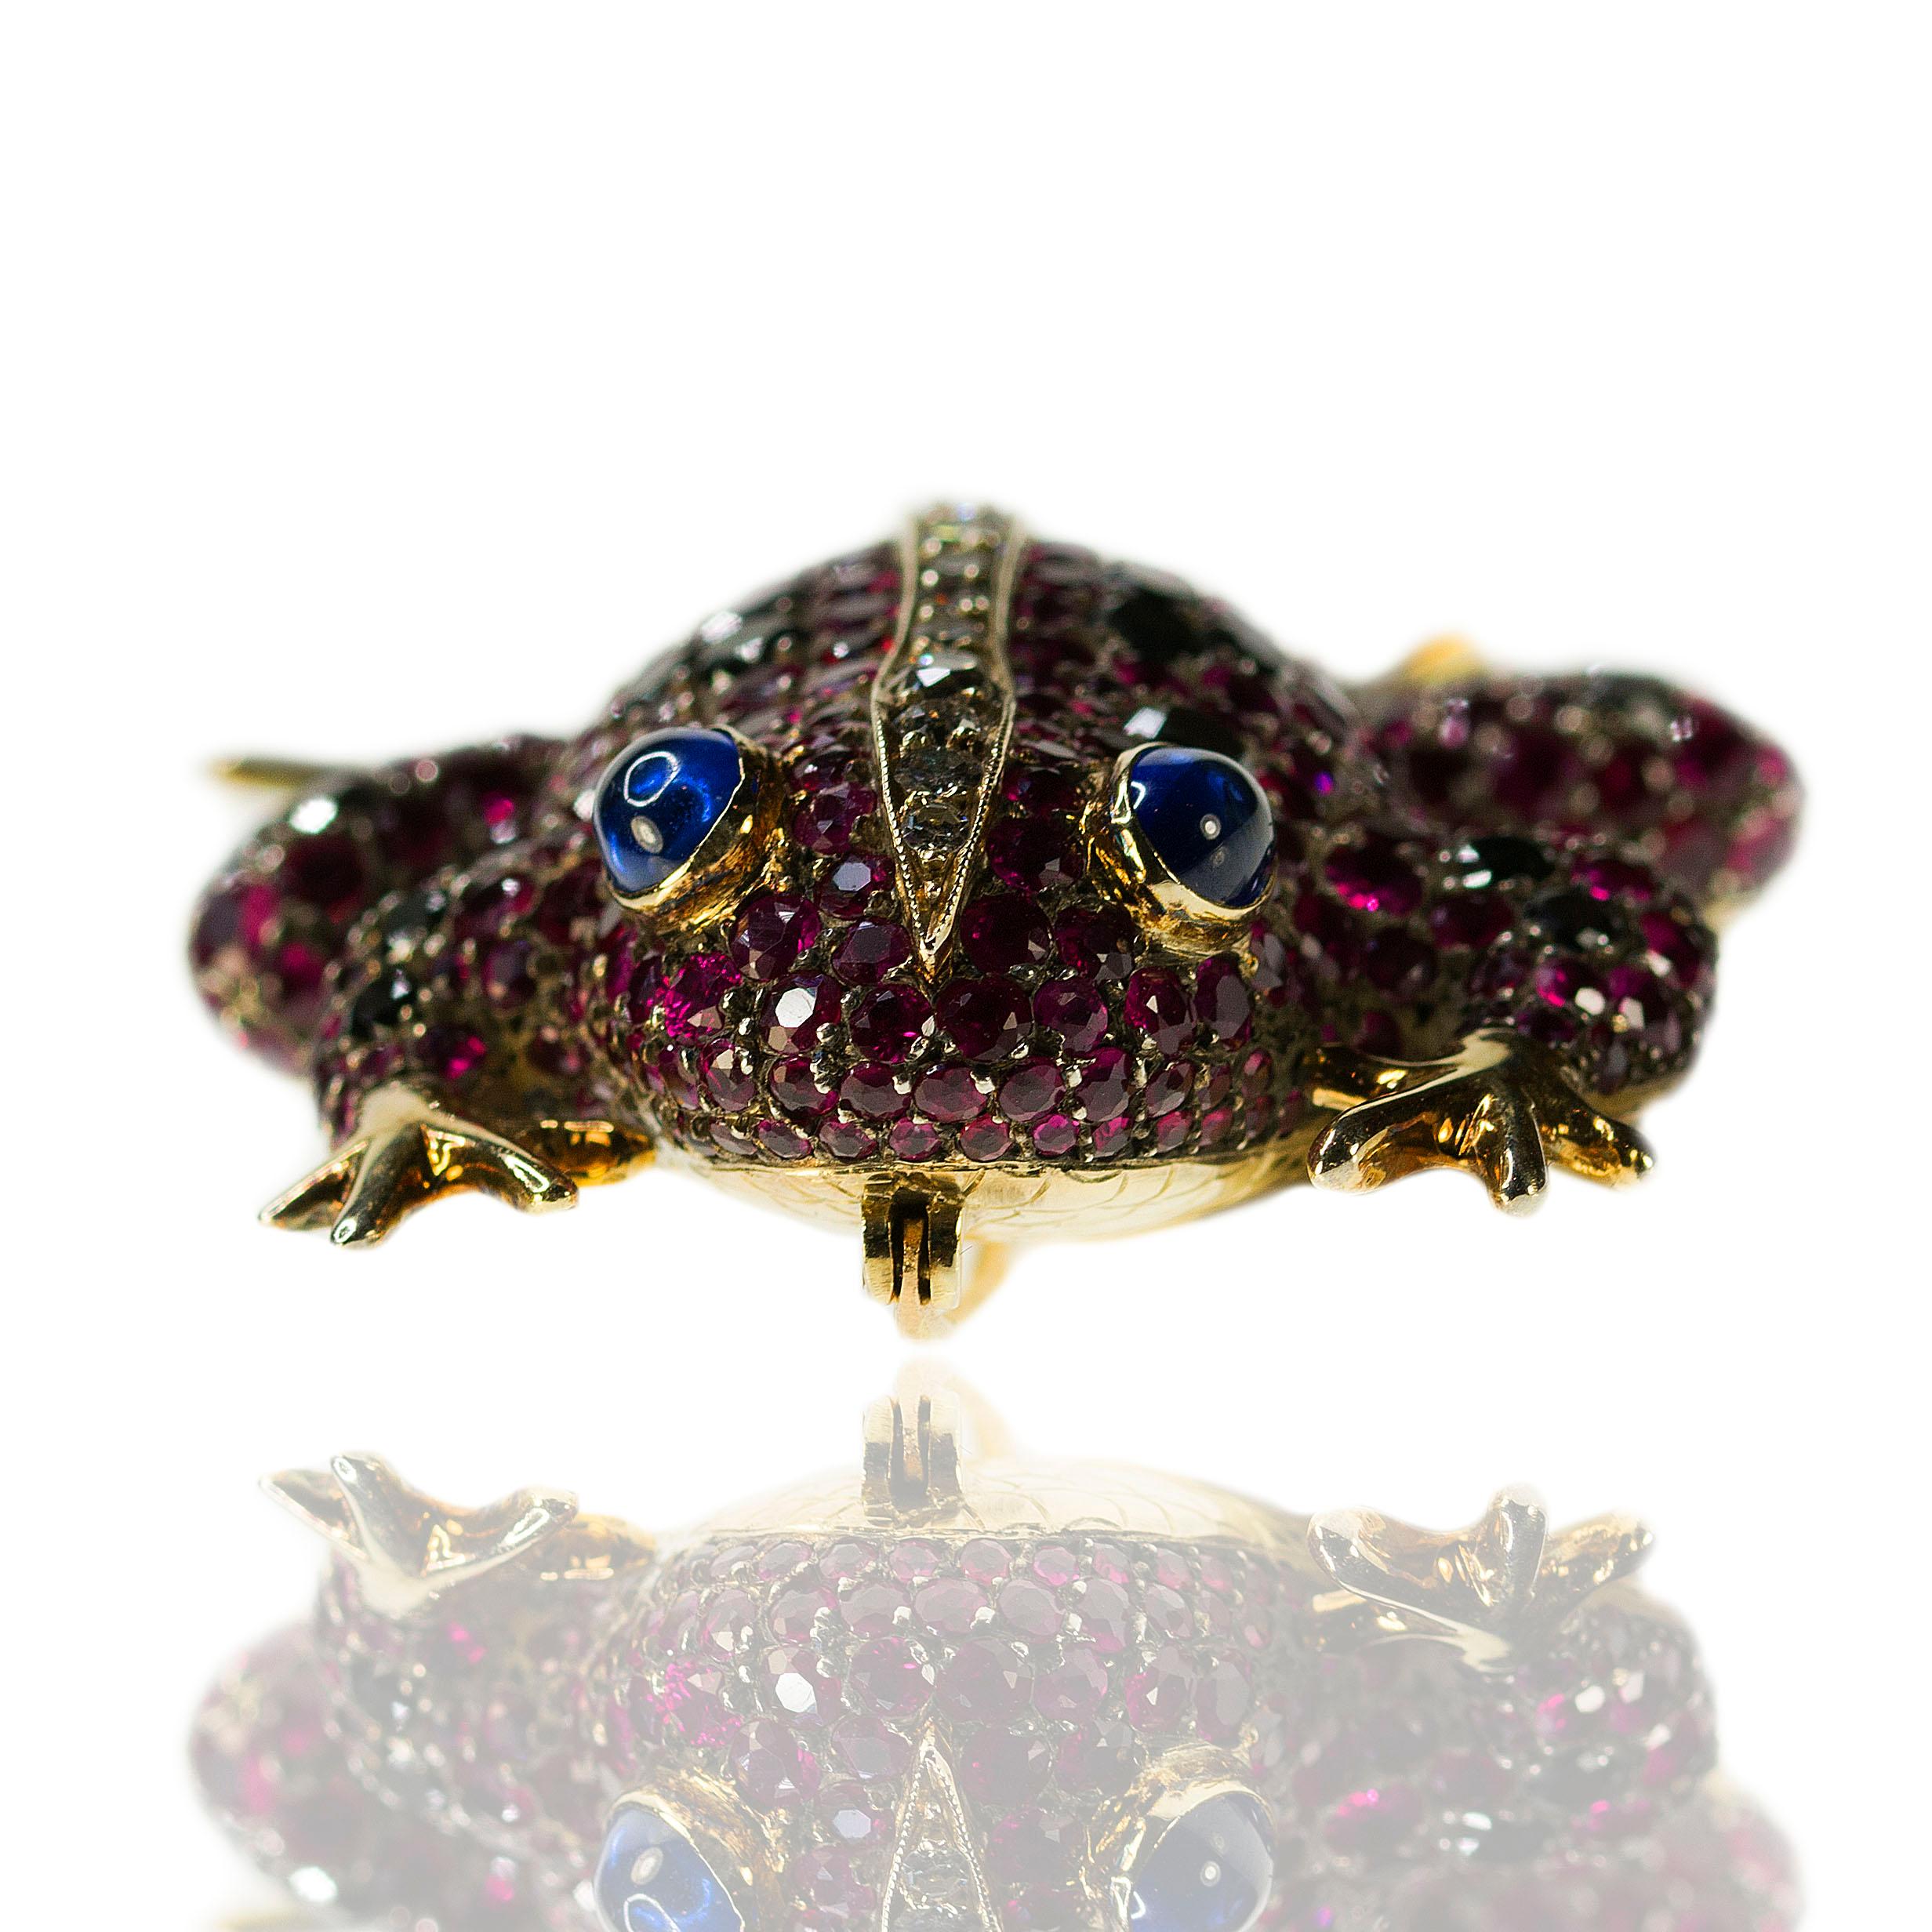 18k Frog brooch with approximately 15.00 carats of Ruby, Diamond & Sapphires 31.93 grams, 2 1/2